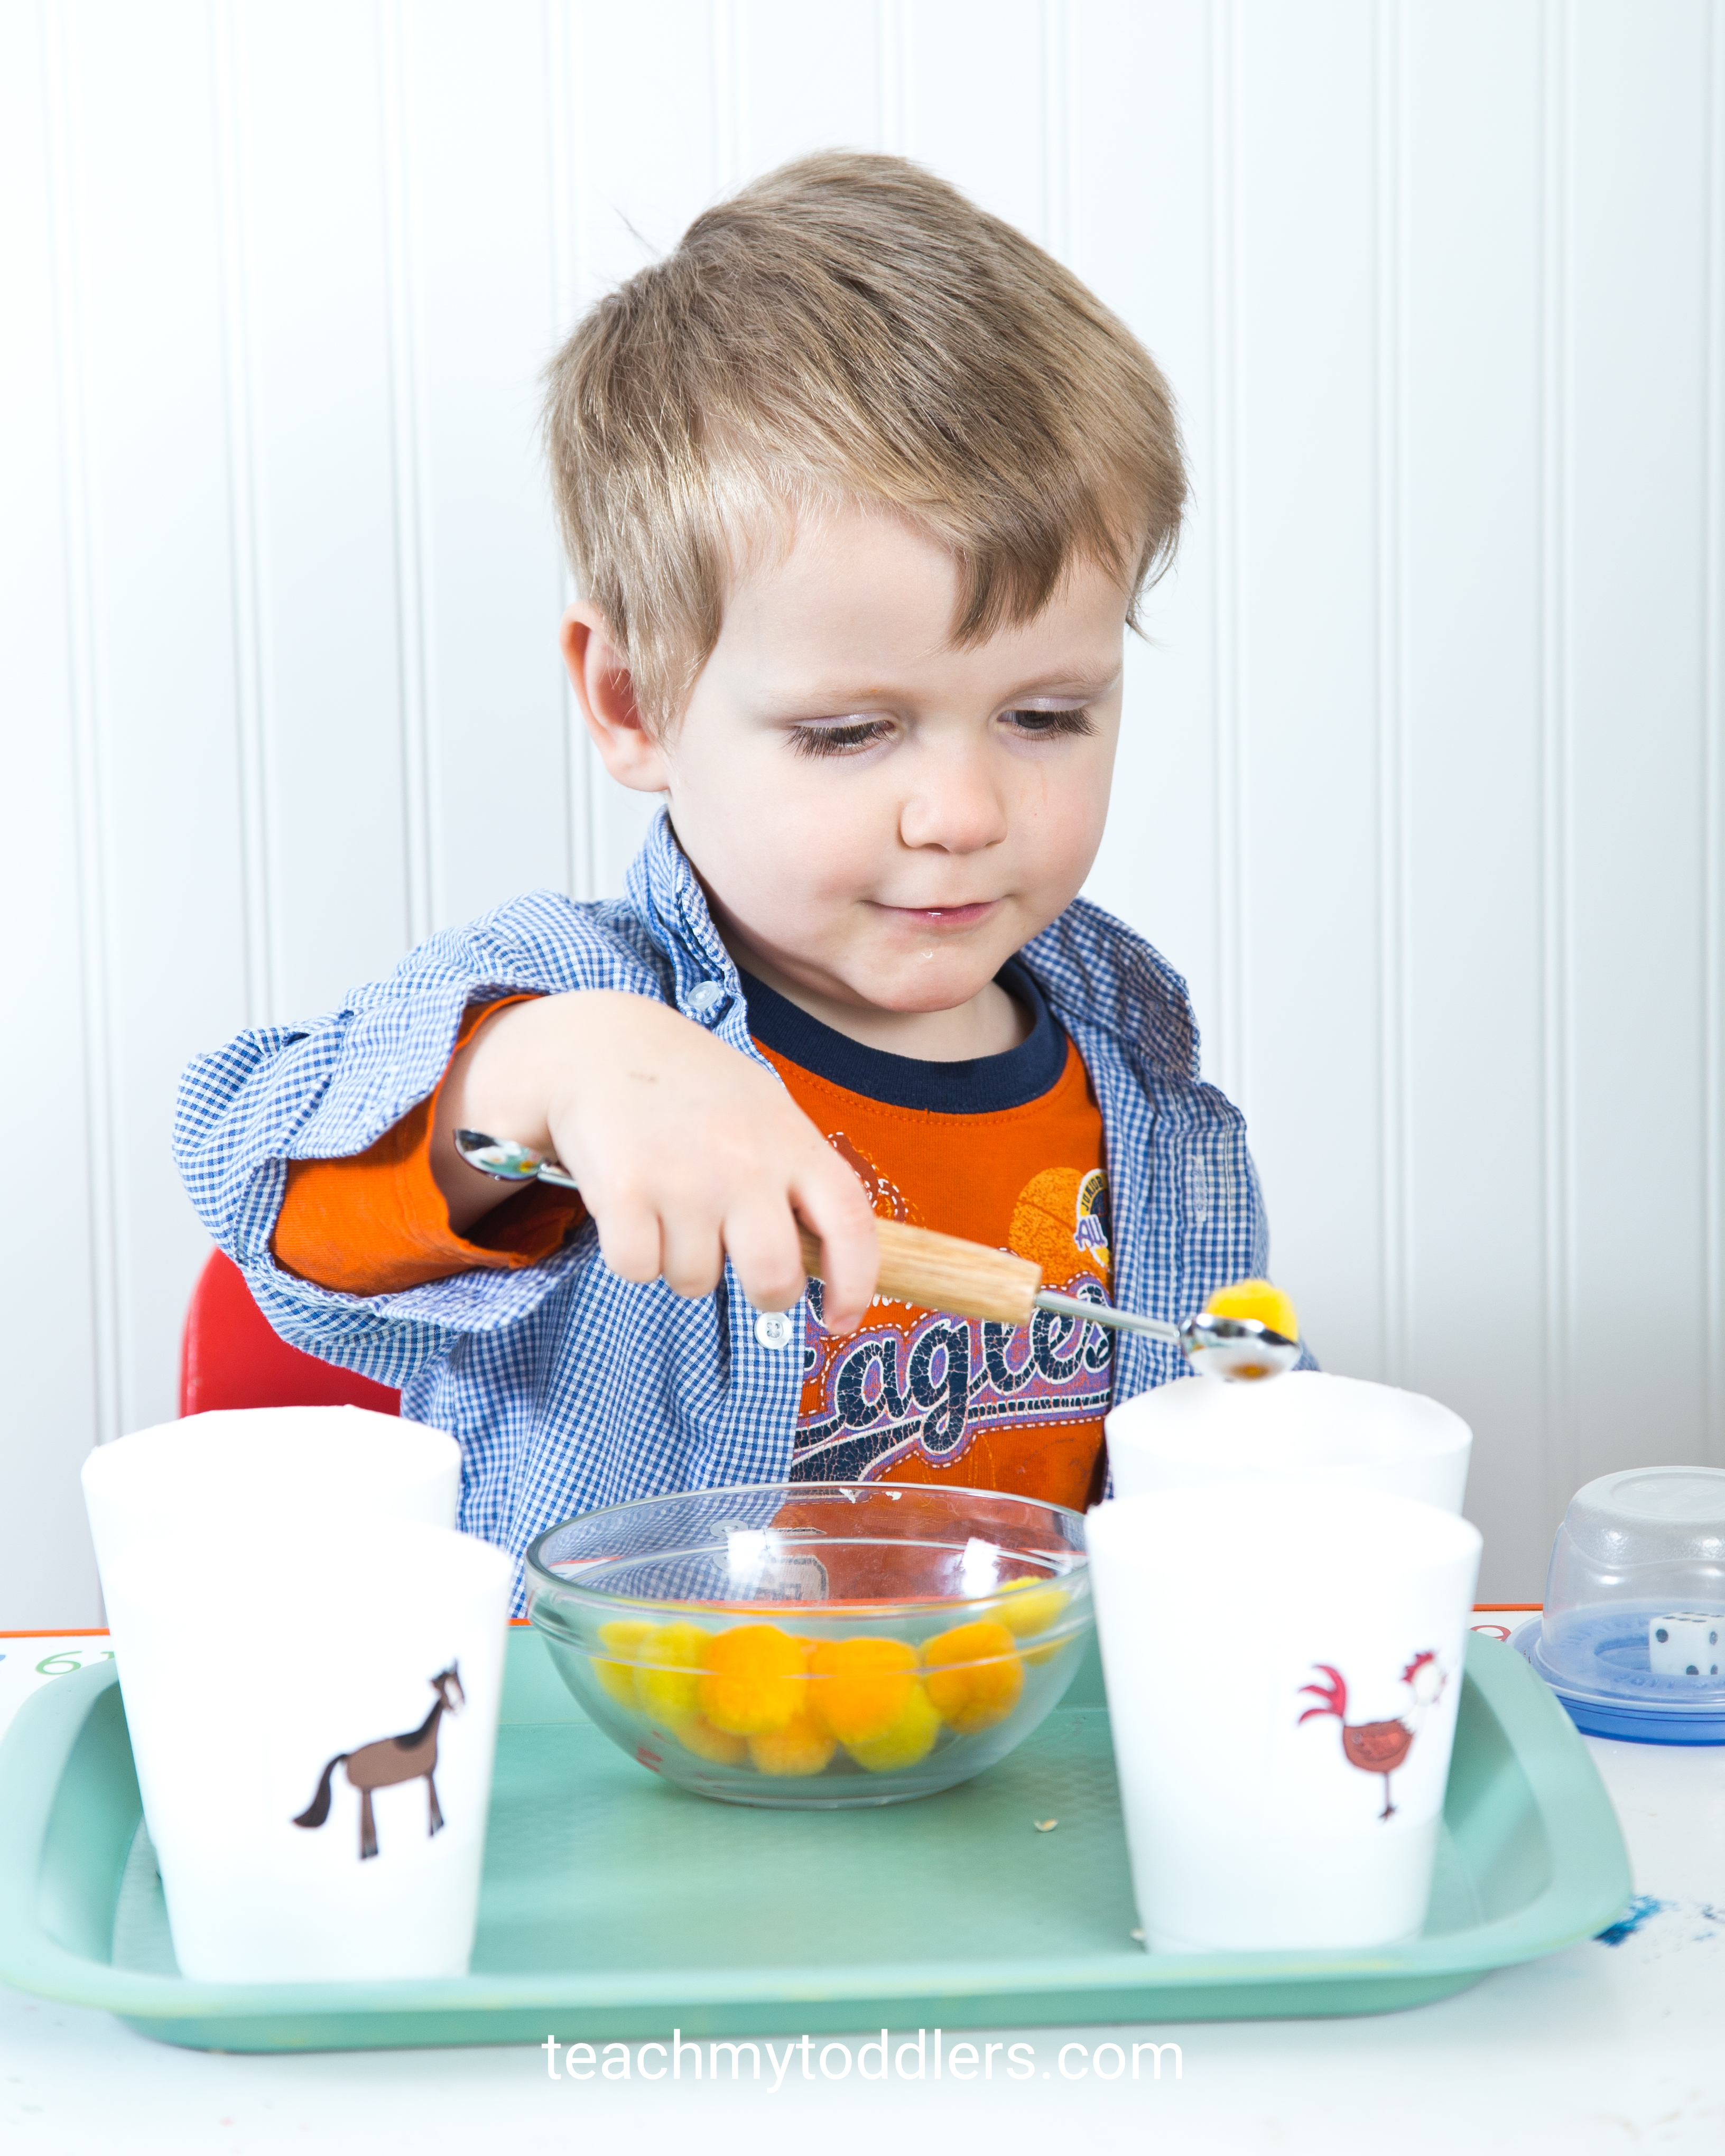 Find out how to use these fun counting activities to teach your toddlers numbers